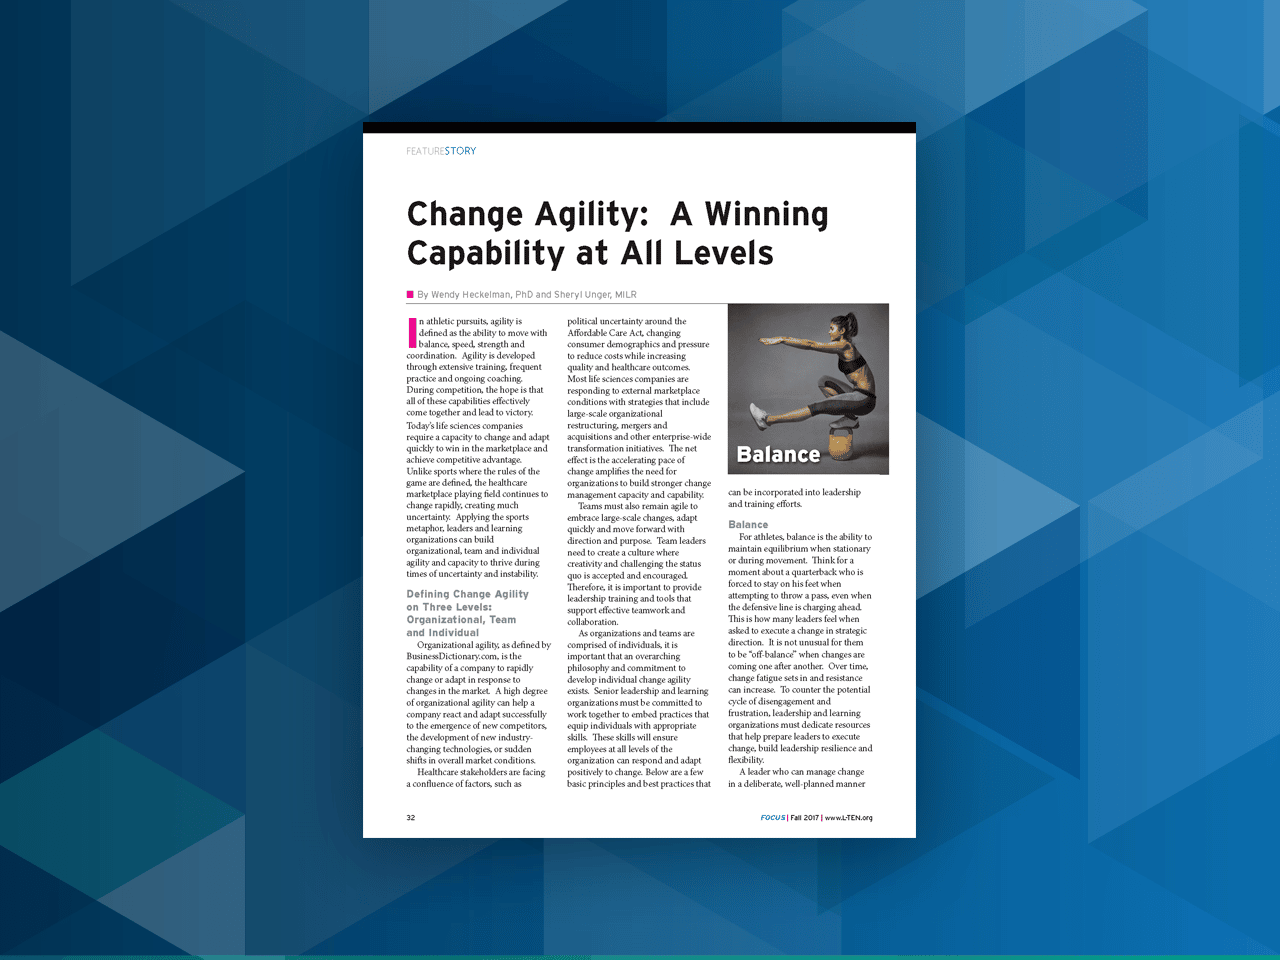 Focus-Change Agility a Winning Capability at All Levels